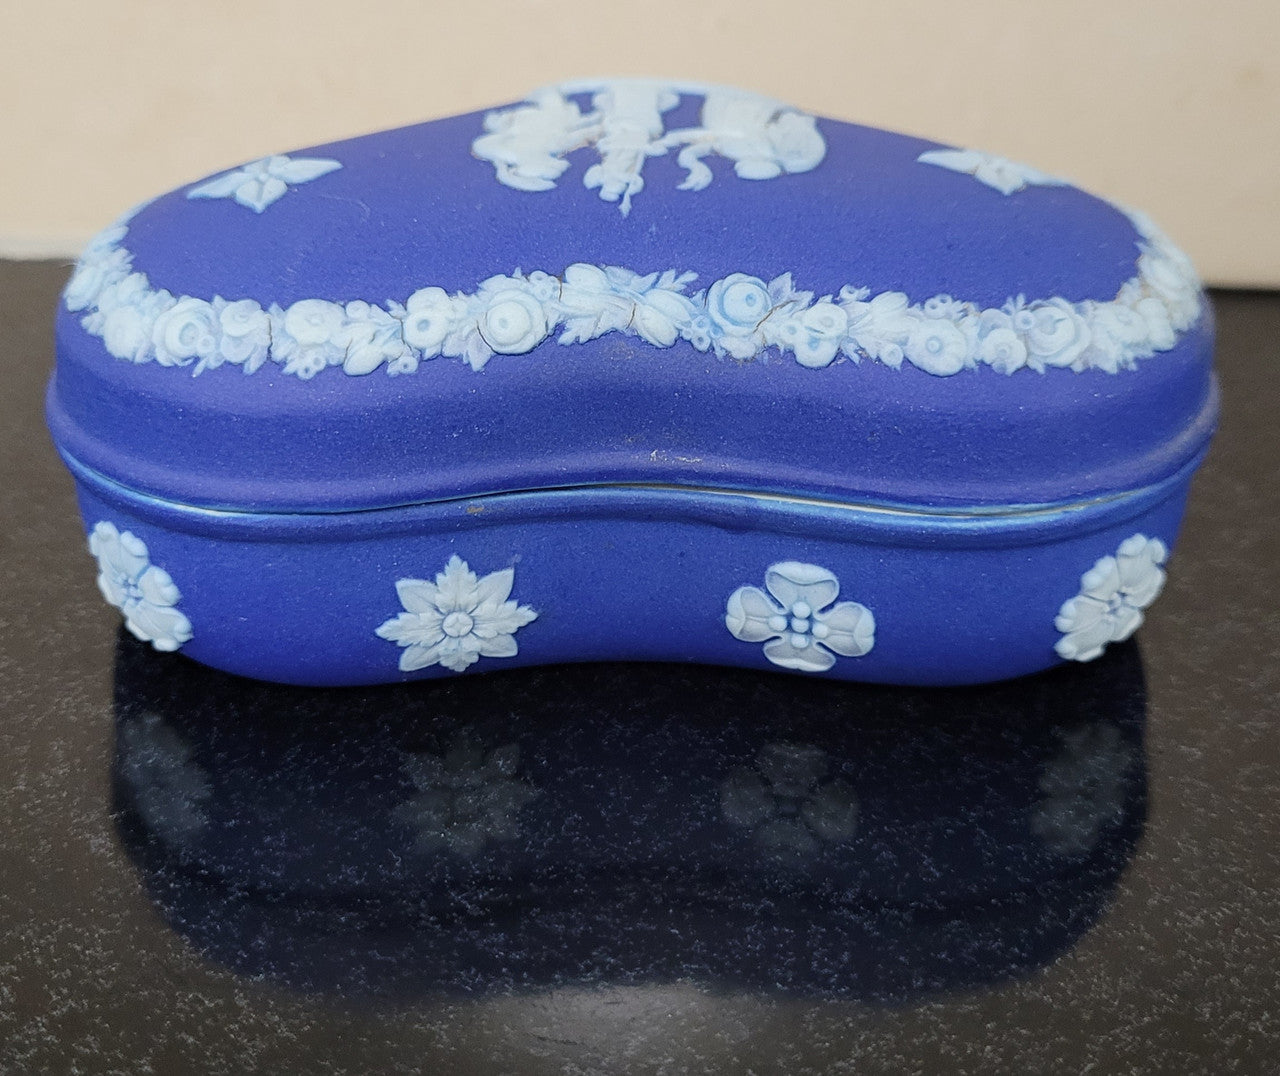 Antique Wedgwood heart shaped covered trinket box. In good original condition, please view photos as they help form part of the description.